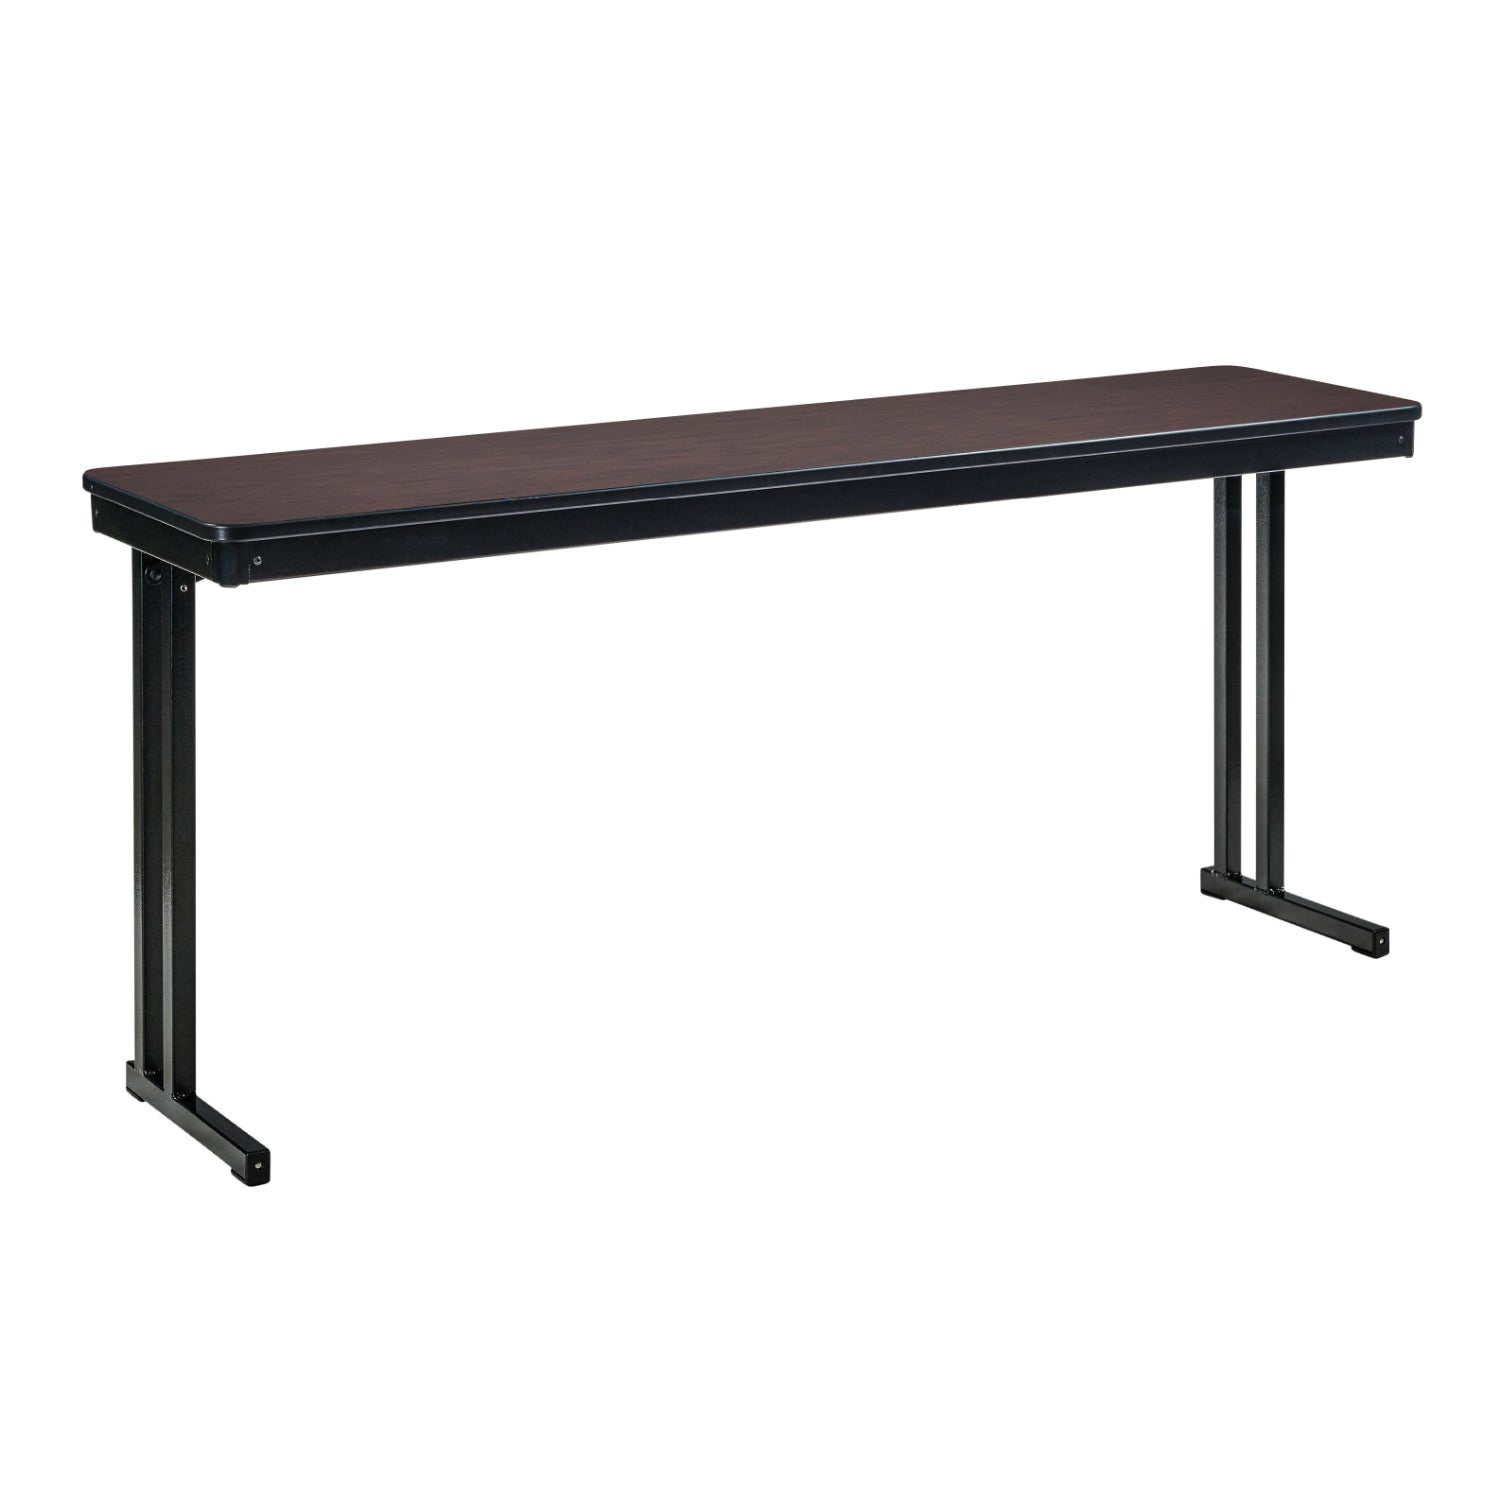 Max Seating Folding Training and Seminar Table with Cantilever Legs, 18" x 60", High Pressure Laminate Top with Particleboard Core/PVC Edge Banding